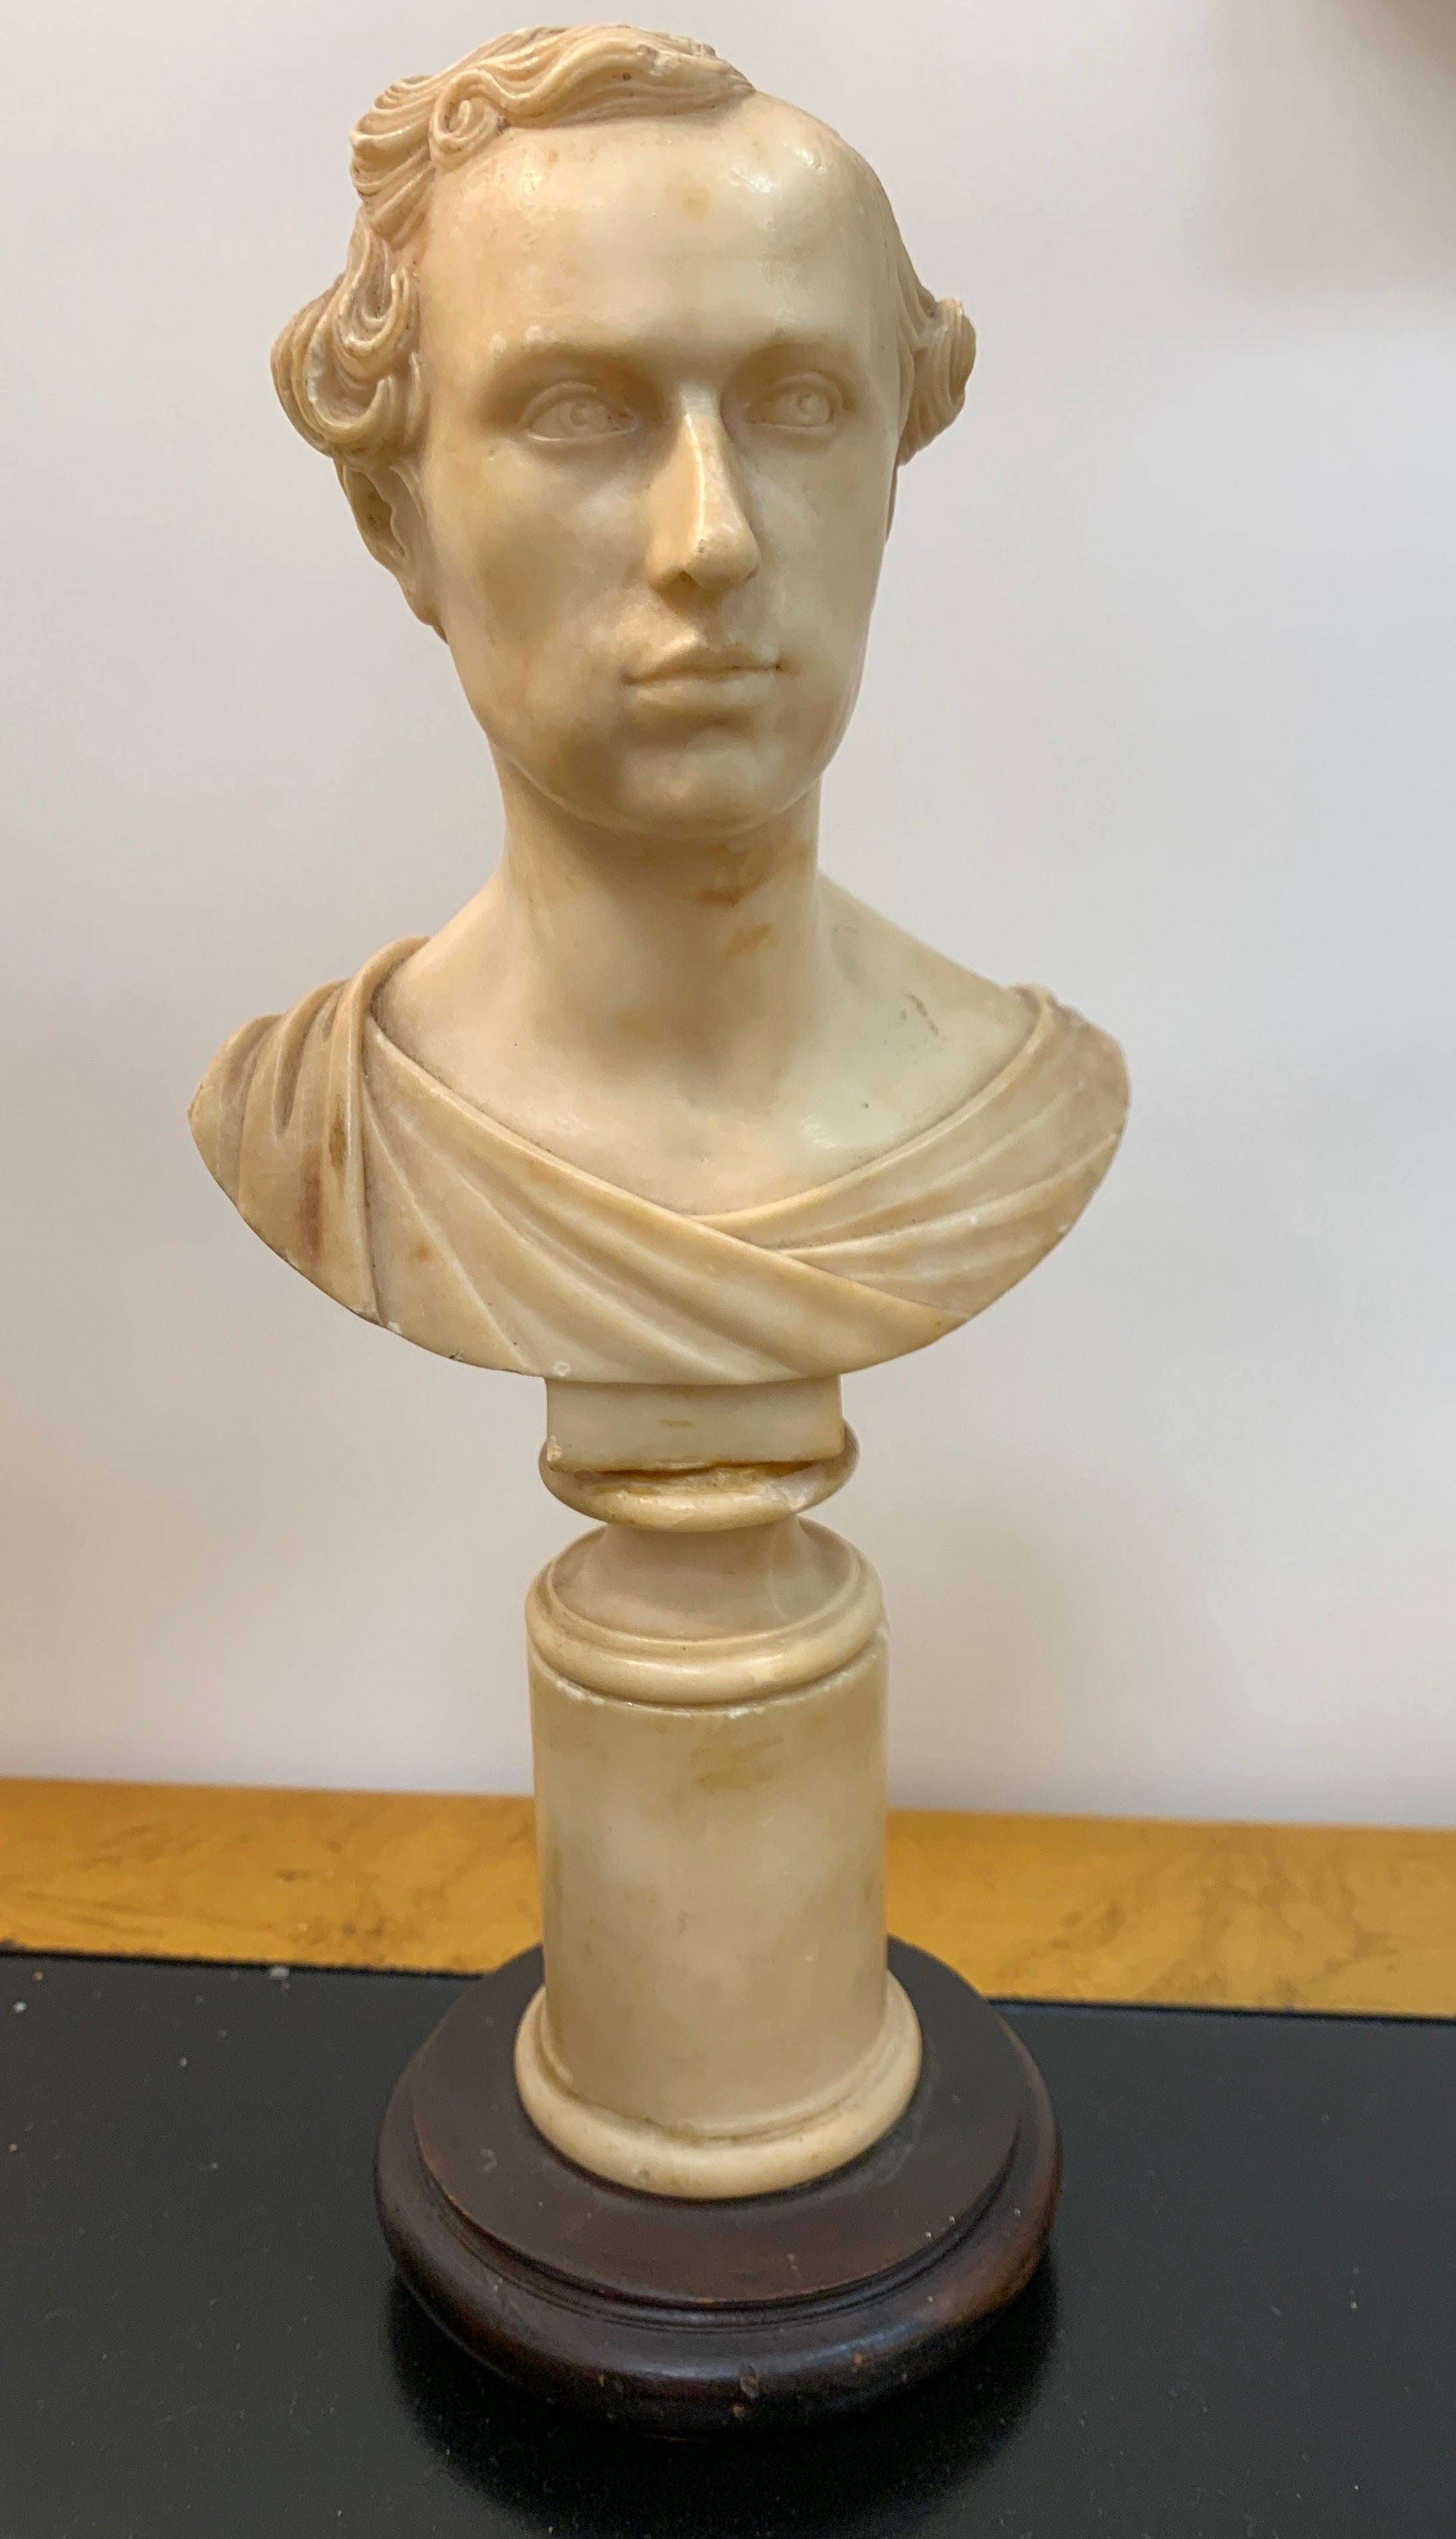 Italian neoclassical Alabaster portrait bust of a gentleman, by Insom Fece, 1839
Finely detailed portrait bust of young man with wavy hair. Inscribed signature on back right shoulder 